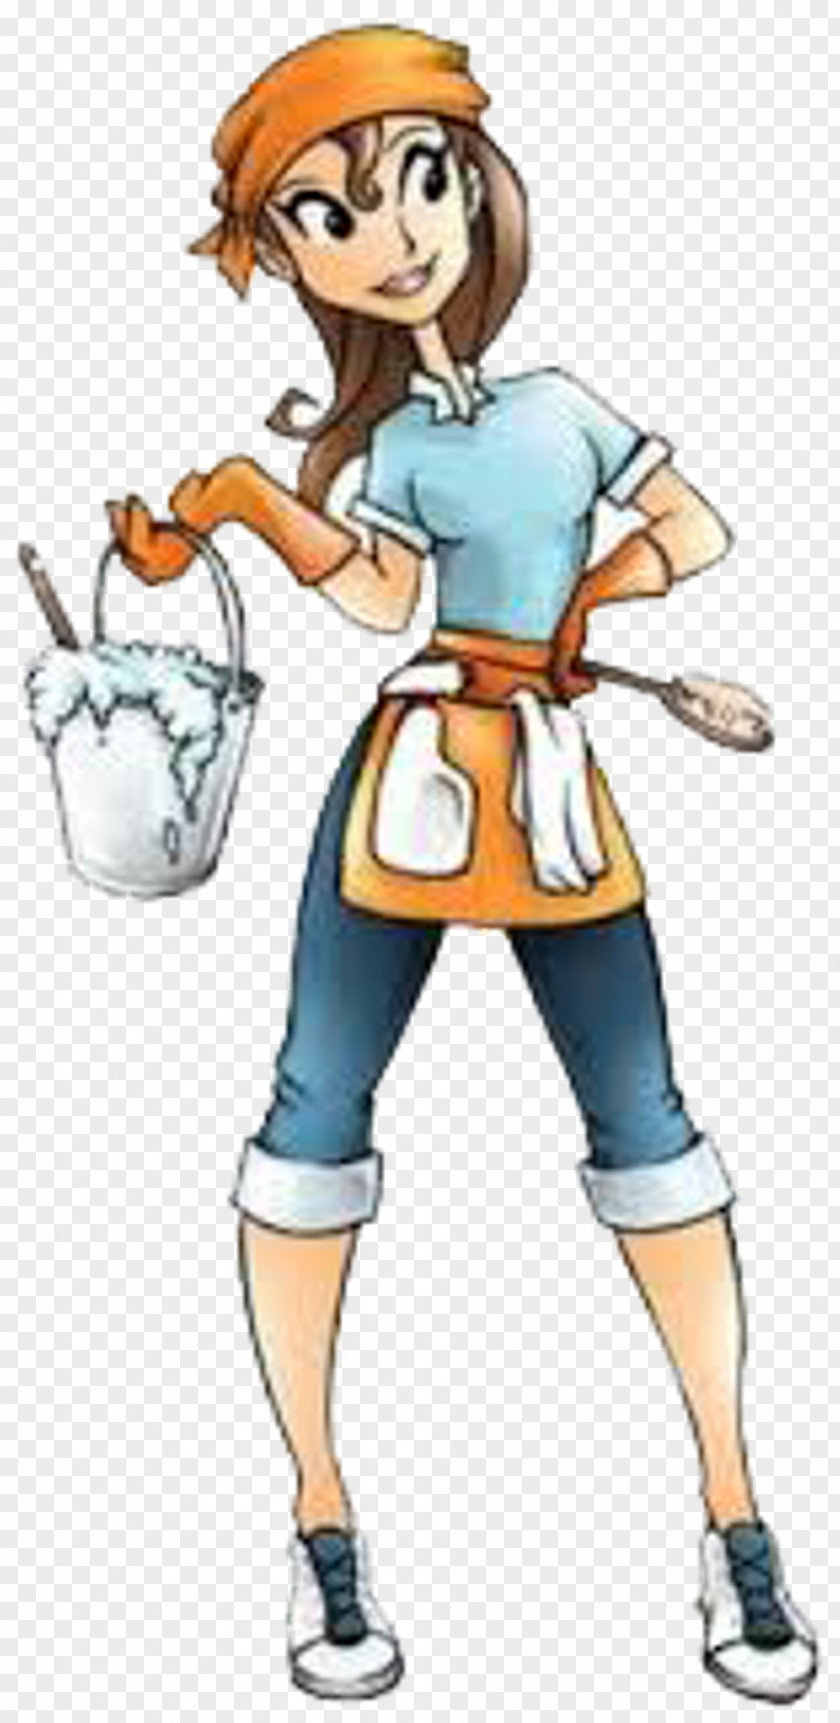 Cleaning Cleaner Maid Service Housekeeping Housekeeper PNG